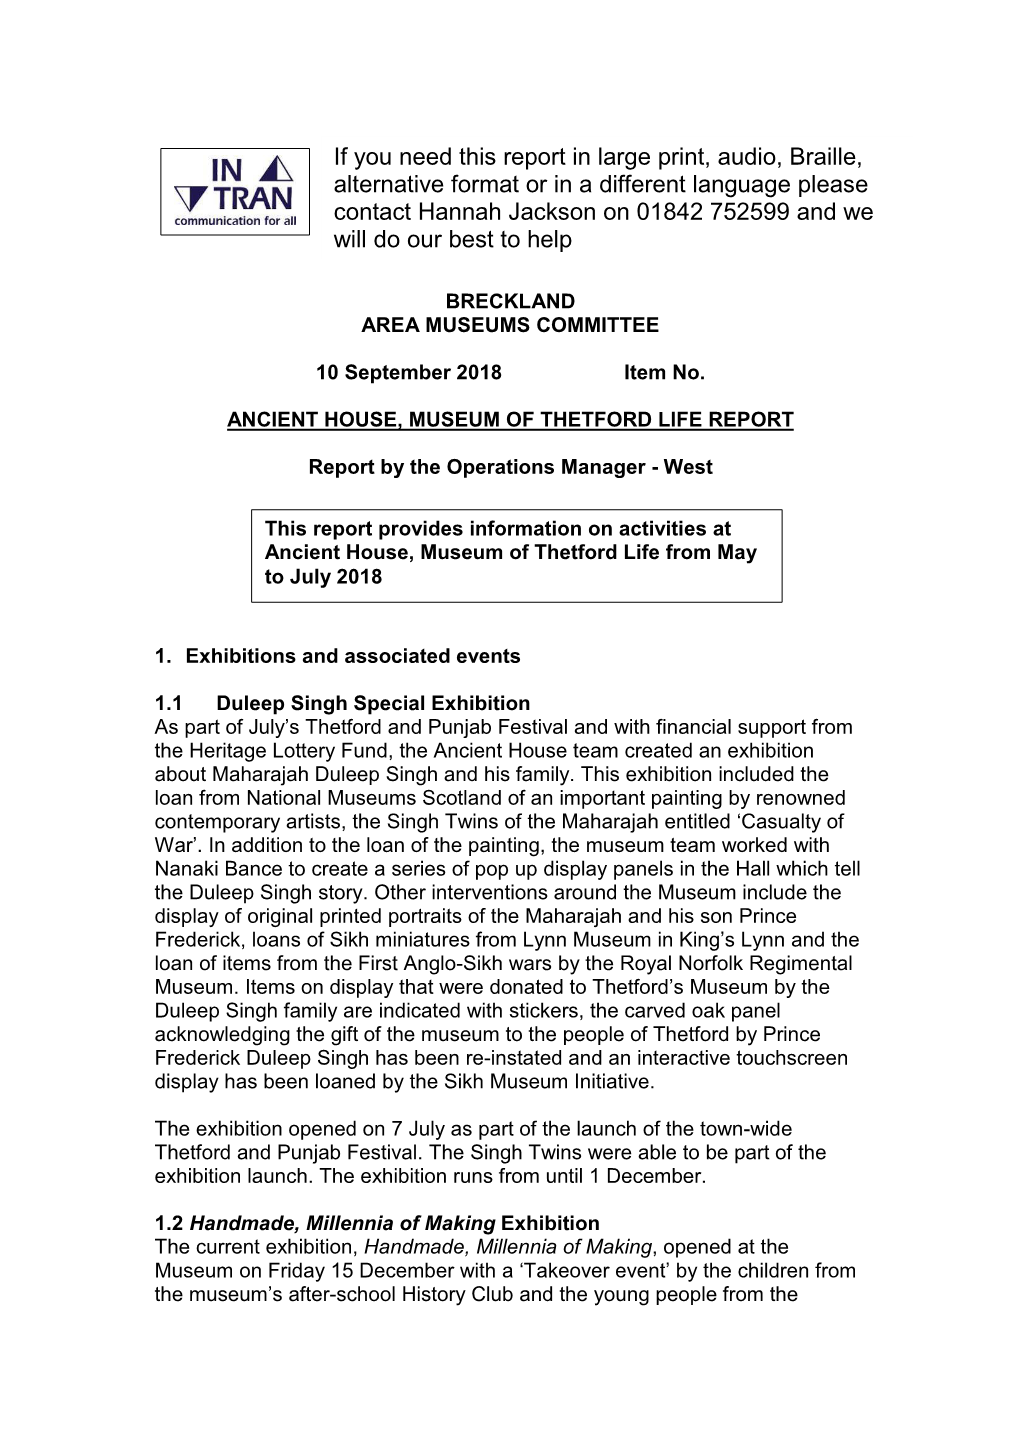 Ancient House Museum of Thetford Life Report PDF 54 KB